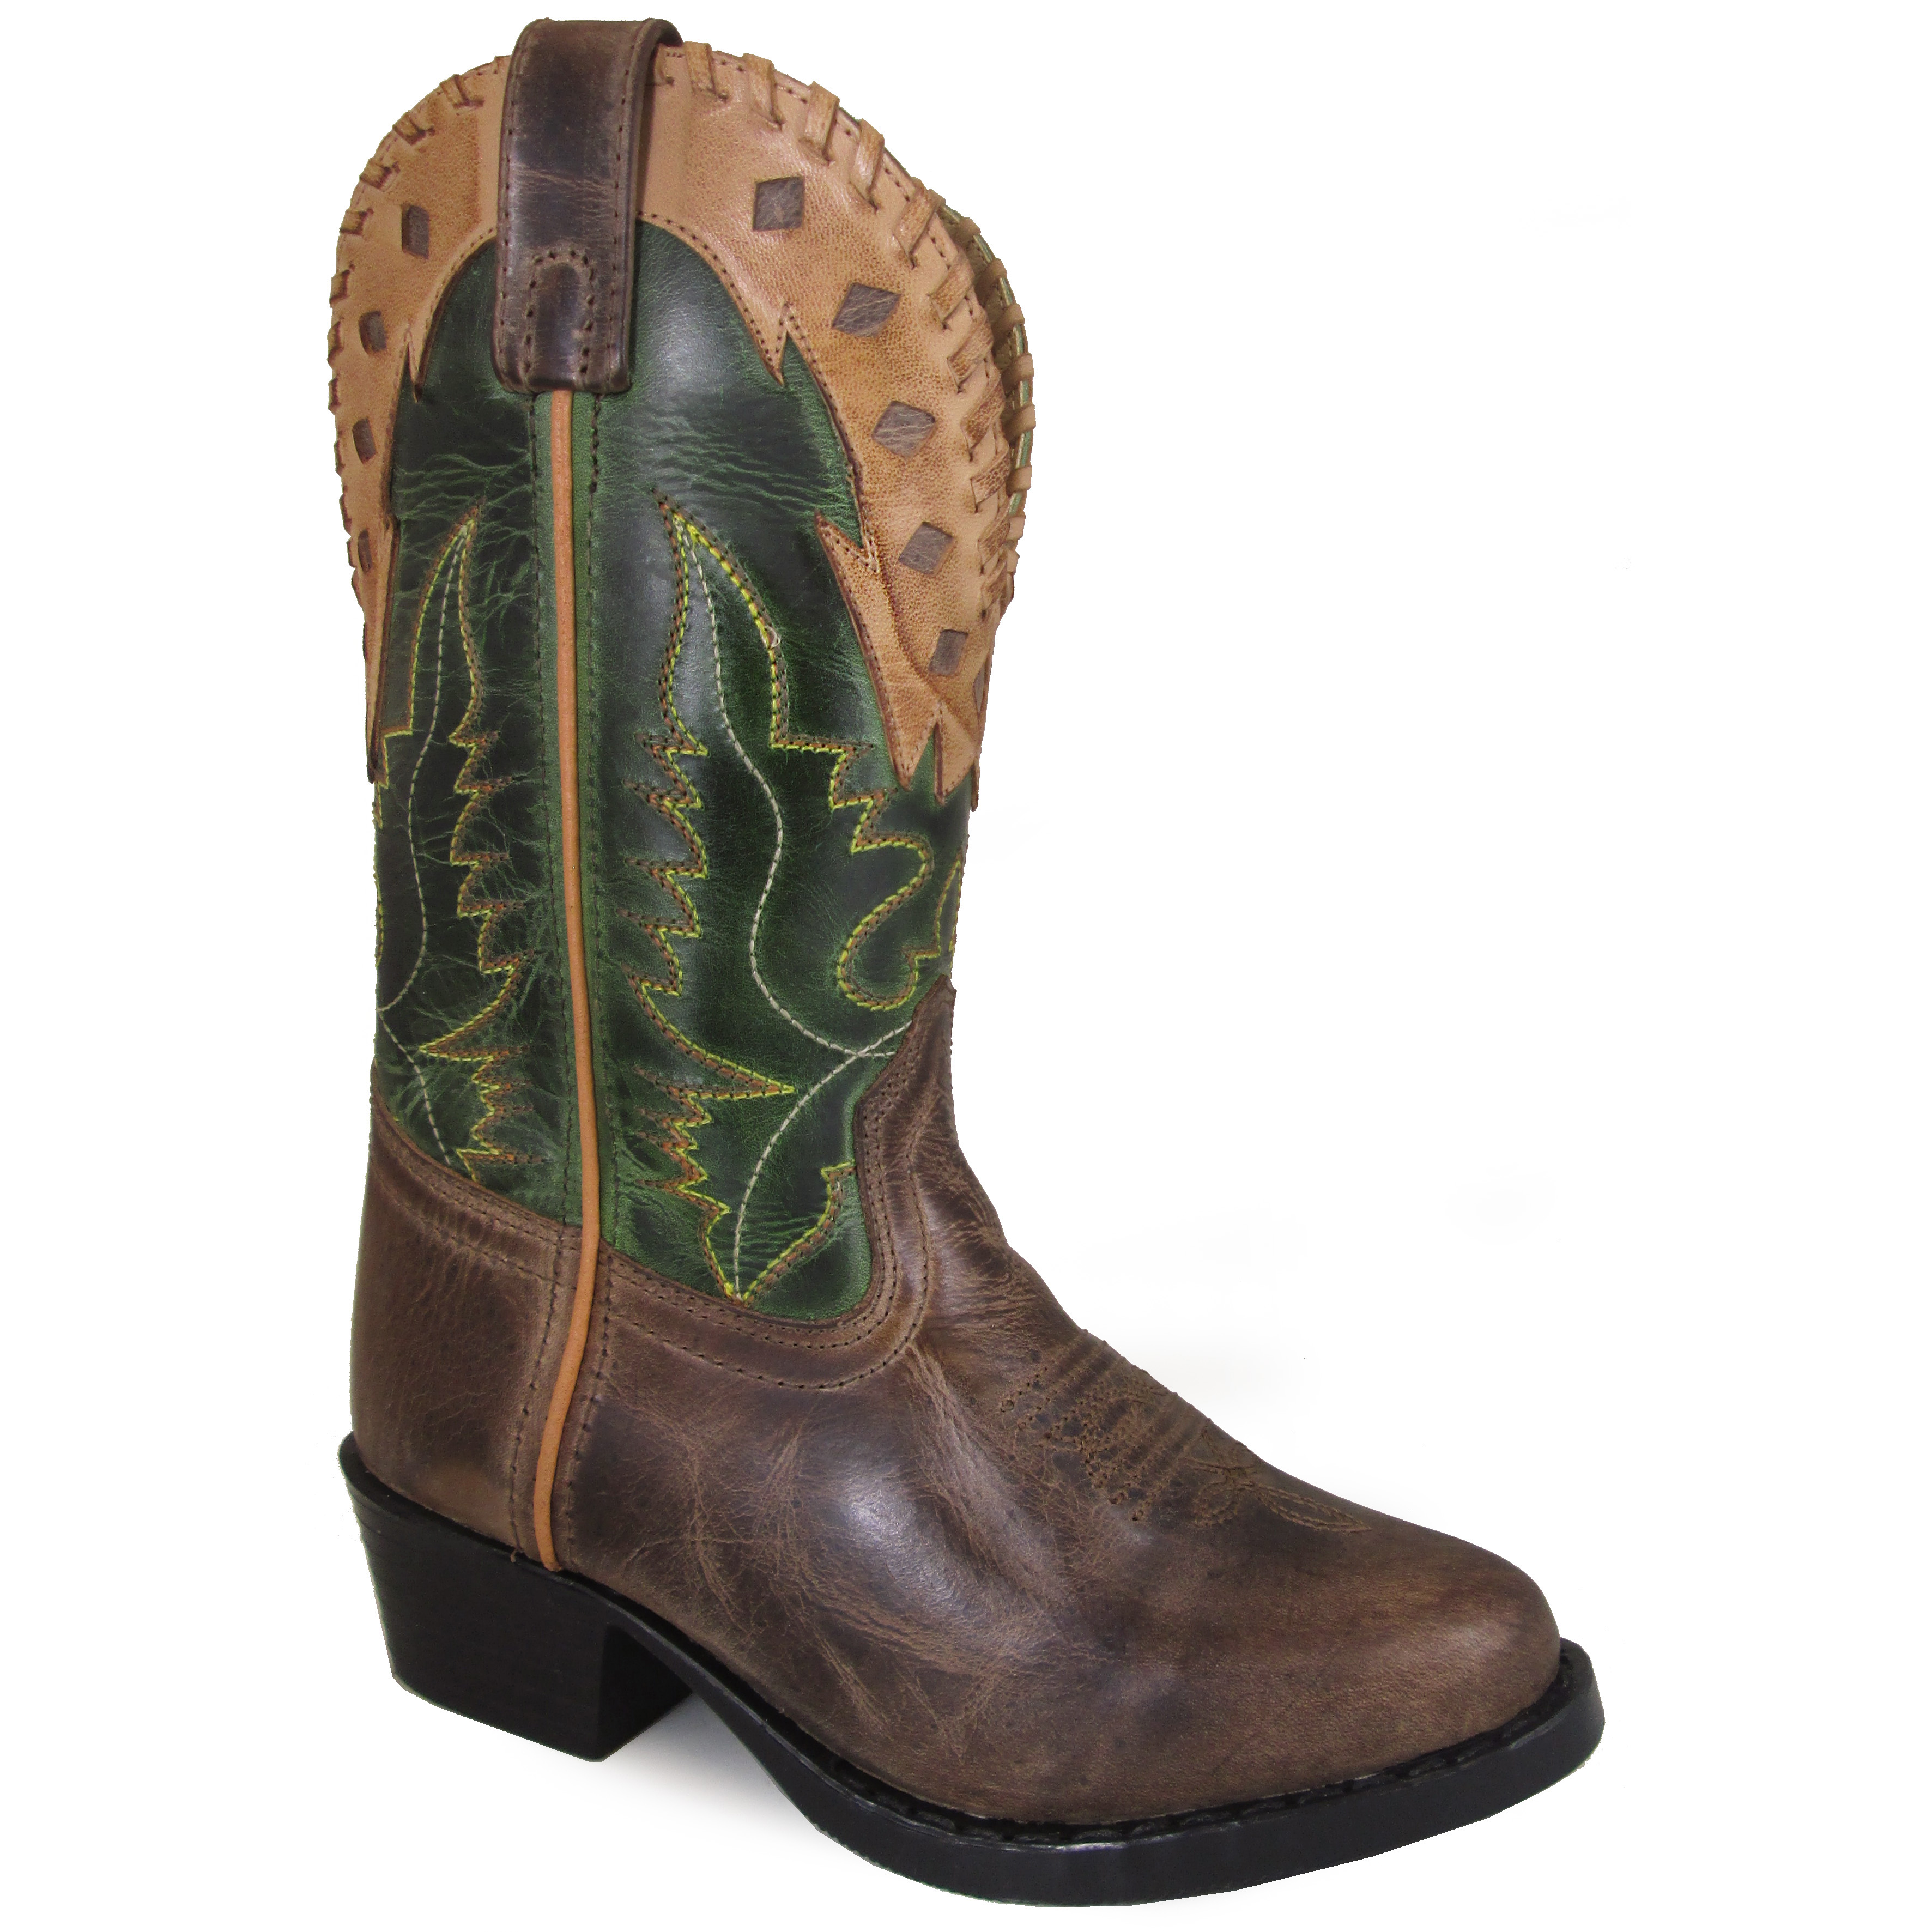 Smoky Mountain Boots Kid's Reno Brown Distress/Green Crackle Leather Cowboy Boot